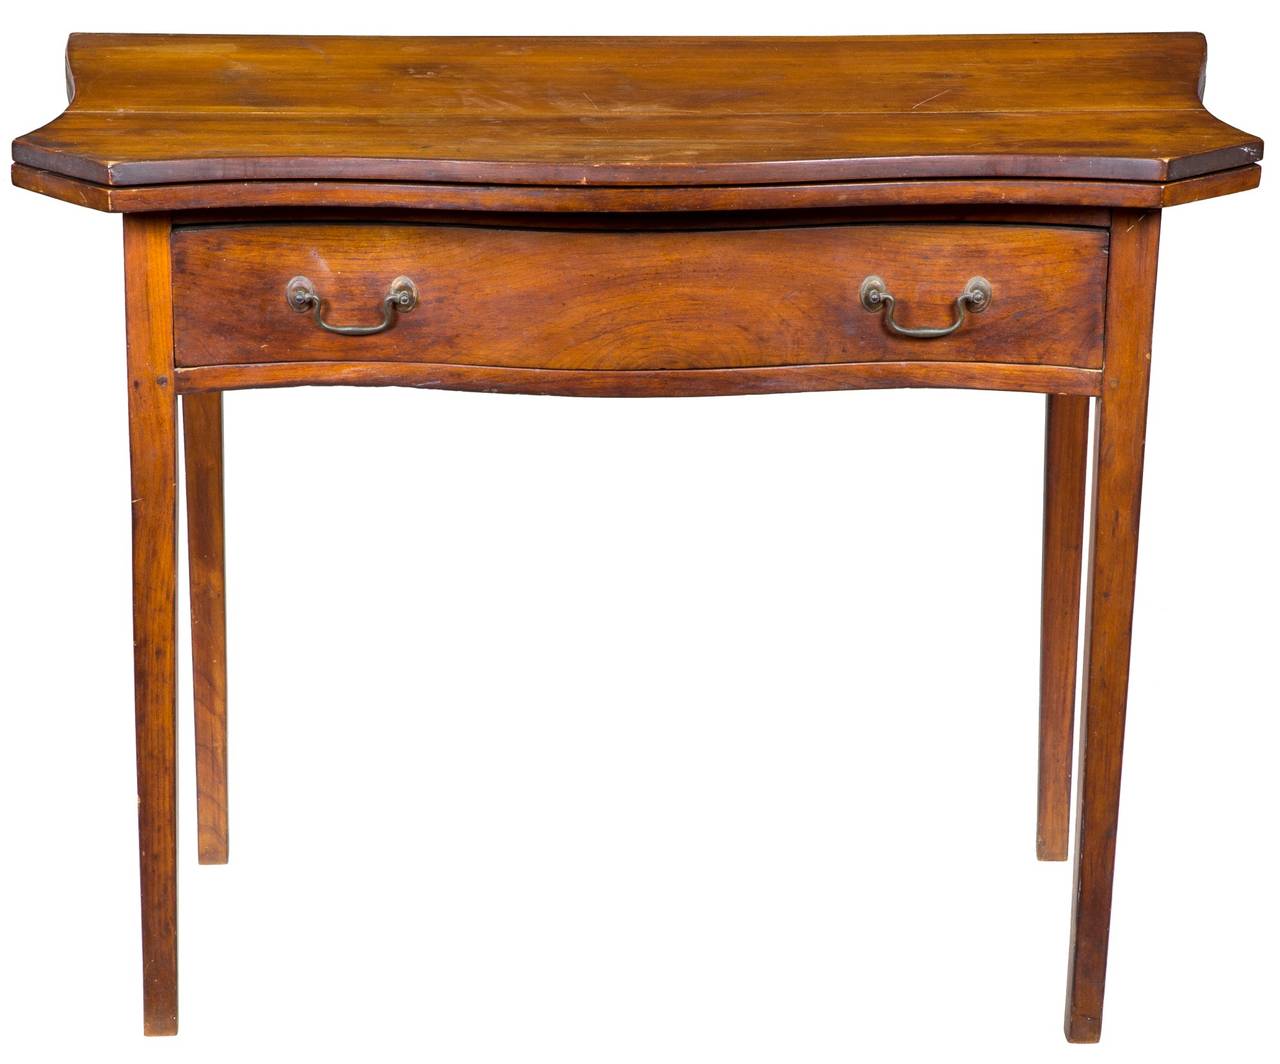 This transitional table has the typical Chippendale serpentine shaped face with a drawer whose front is composed of solid cherry that is carved from a four inch thick log (see detail). The legs, however, are Hepplewhite in style, being long and